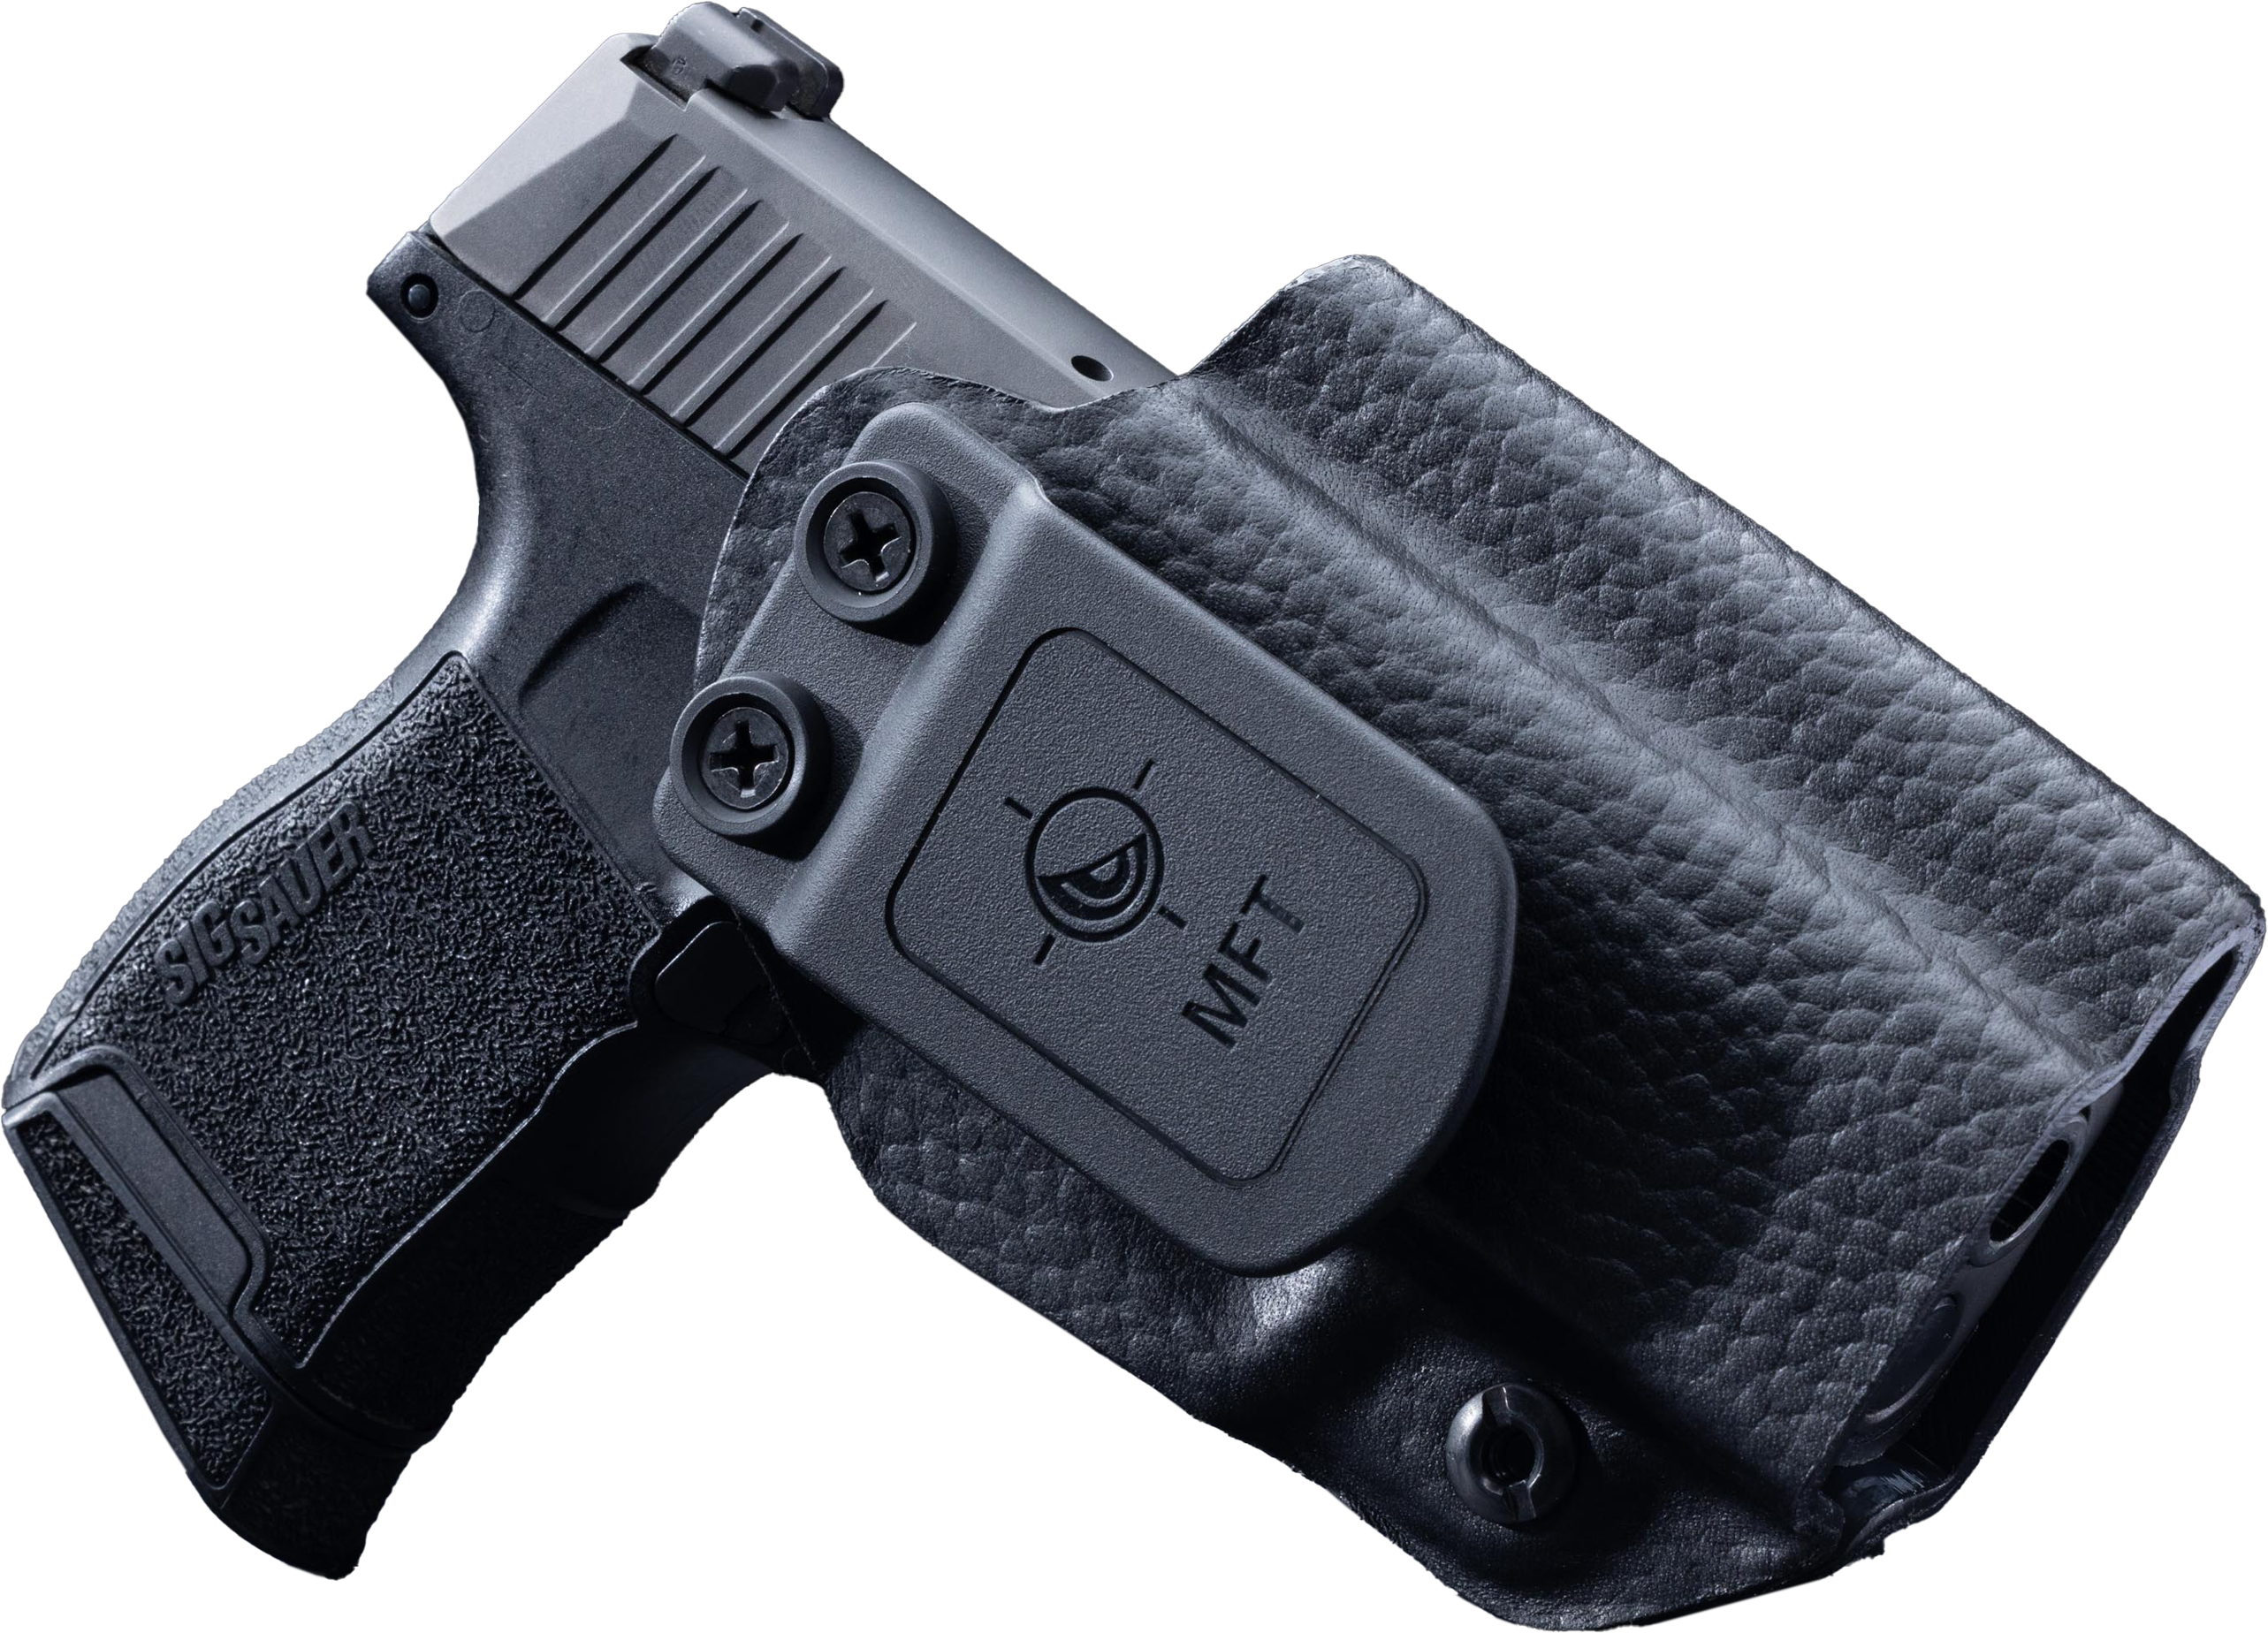 Precision Leather Fit - New MFT Black Leather Hybrid Holsters